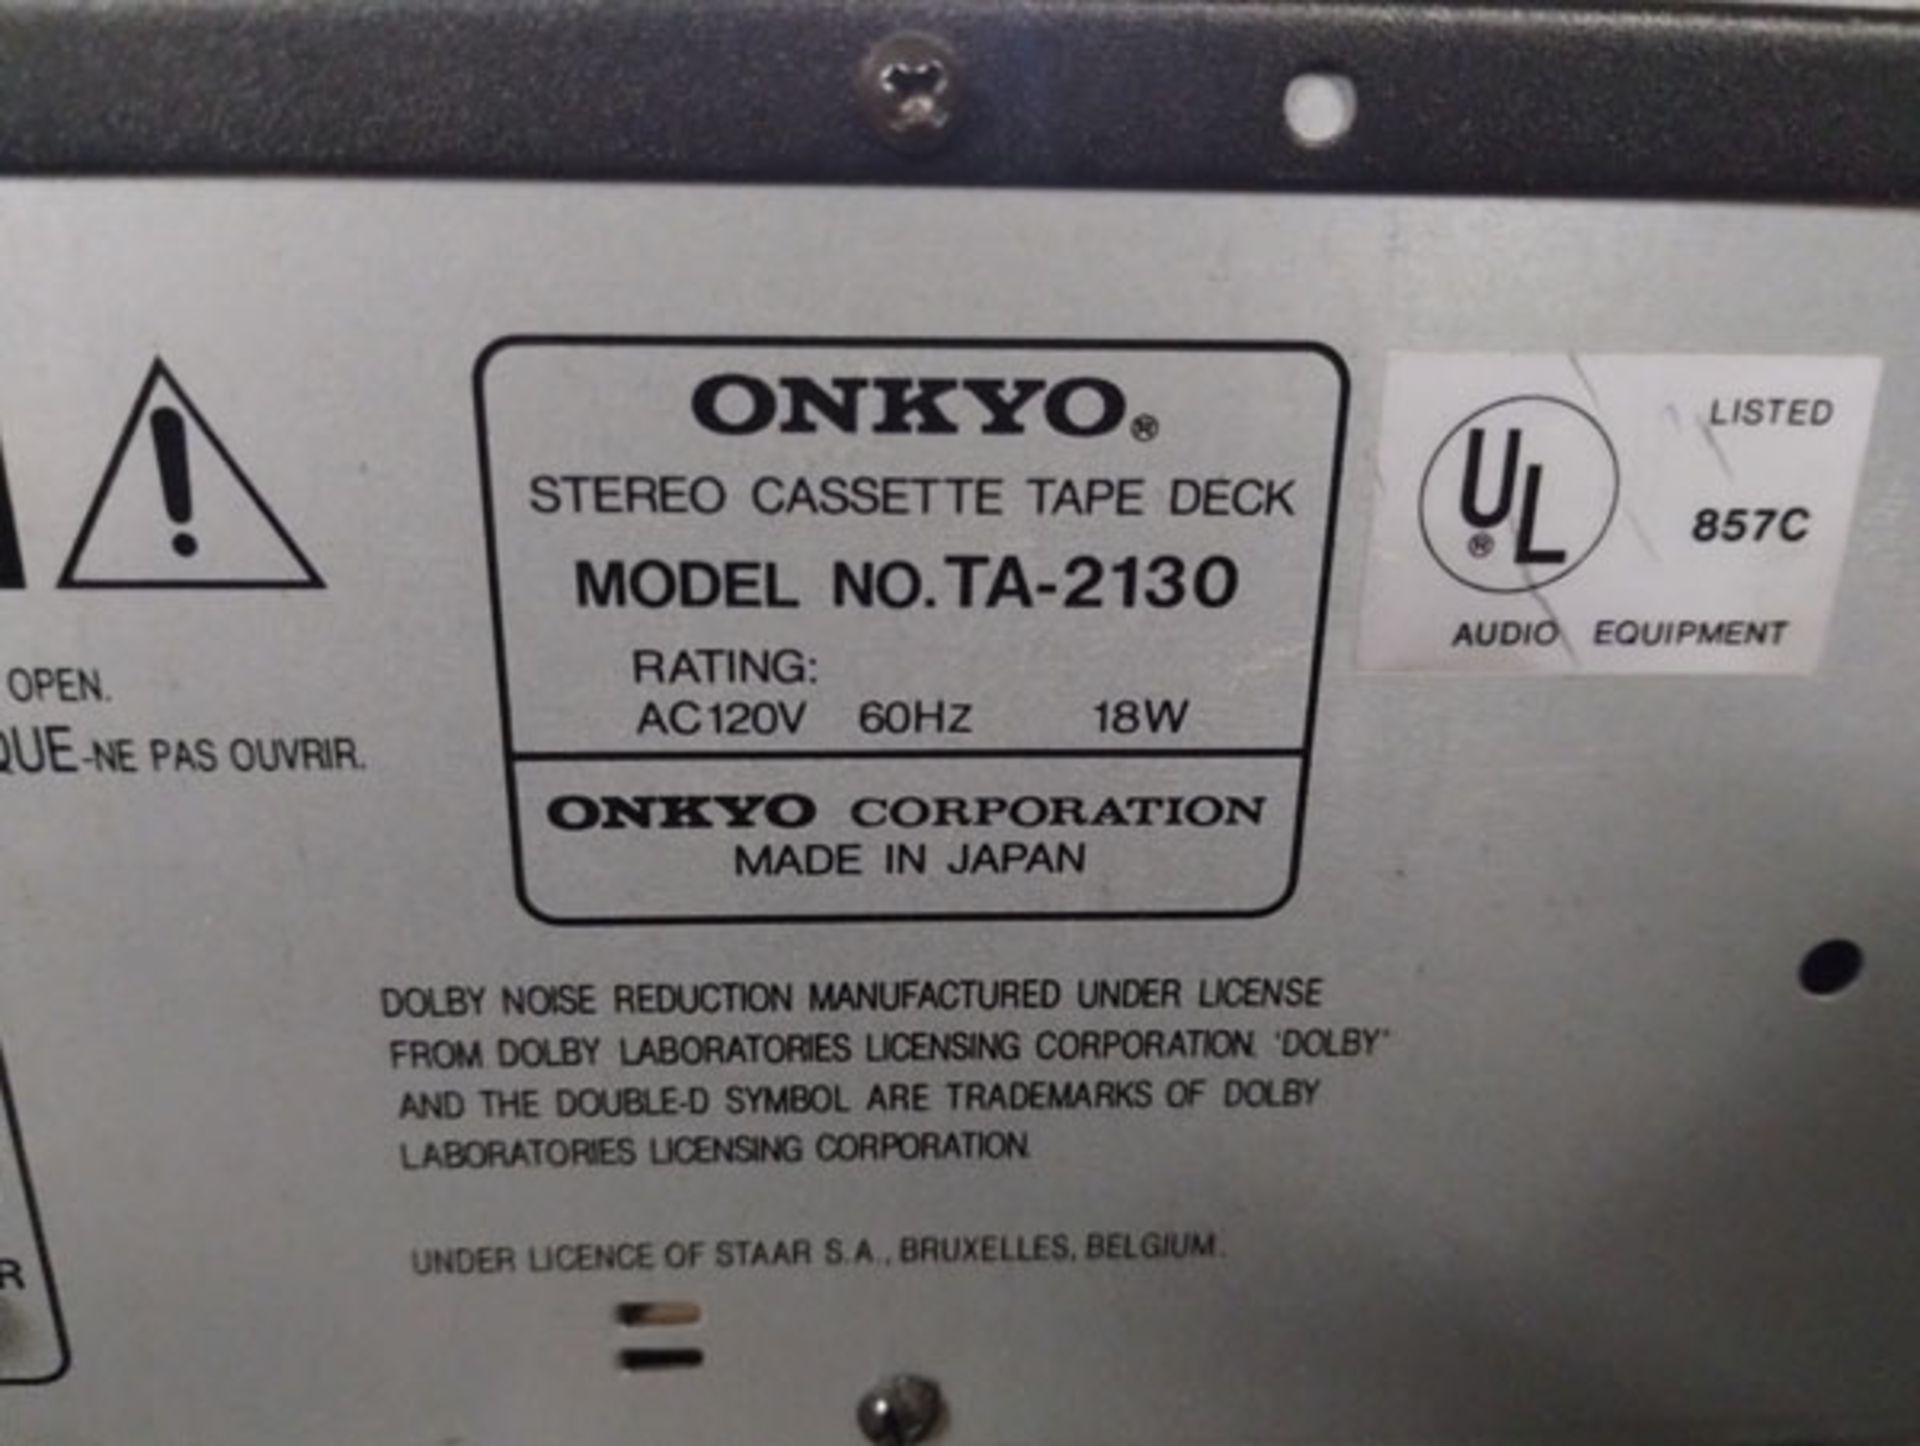 ONKYO TA-2130 STEREO CASSETTE TAPE DECK - AS IS - Image 7 of 7